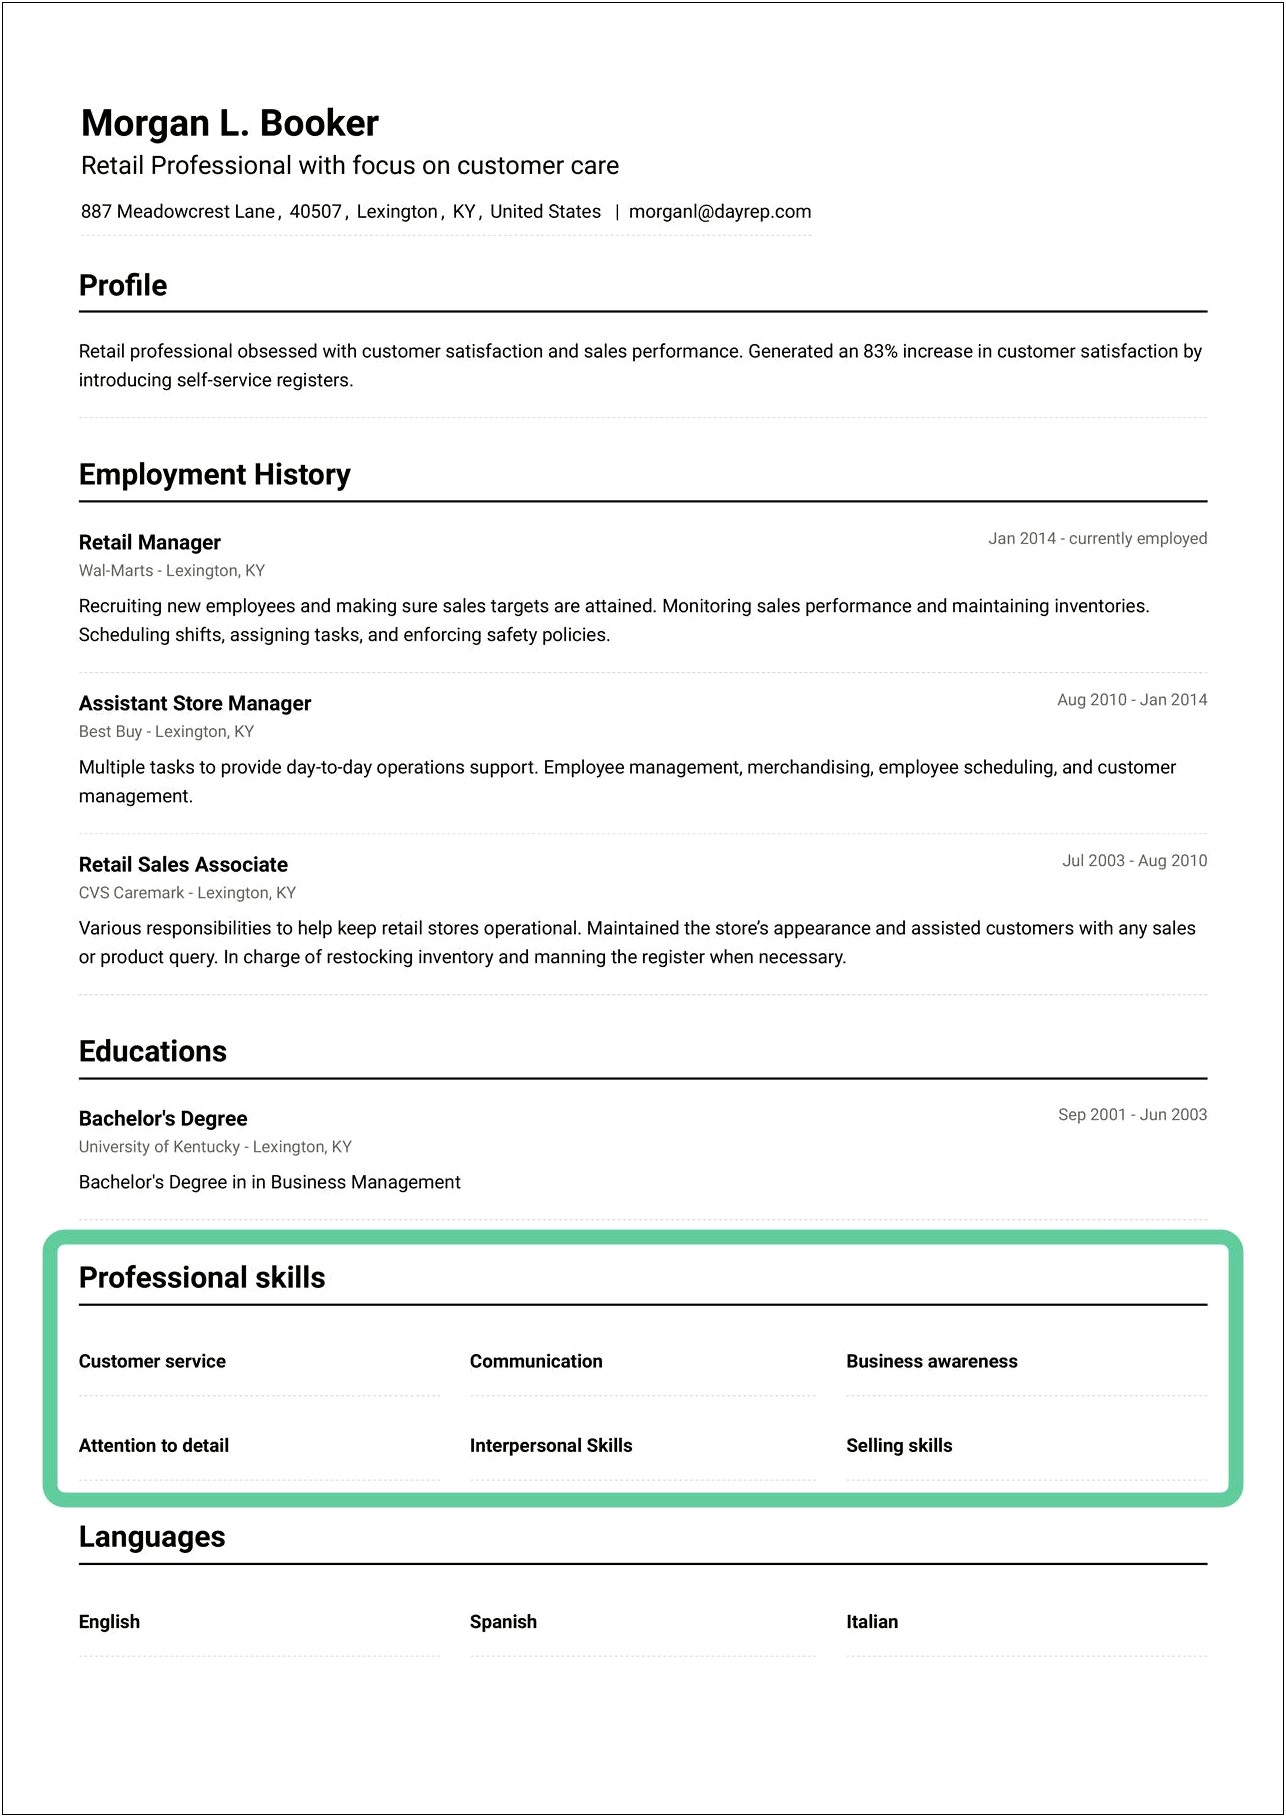 Resume Highlights Extensive Technical And Client Skills